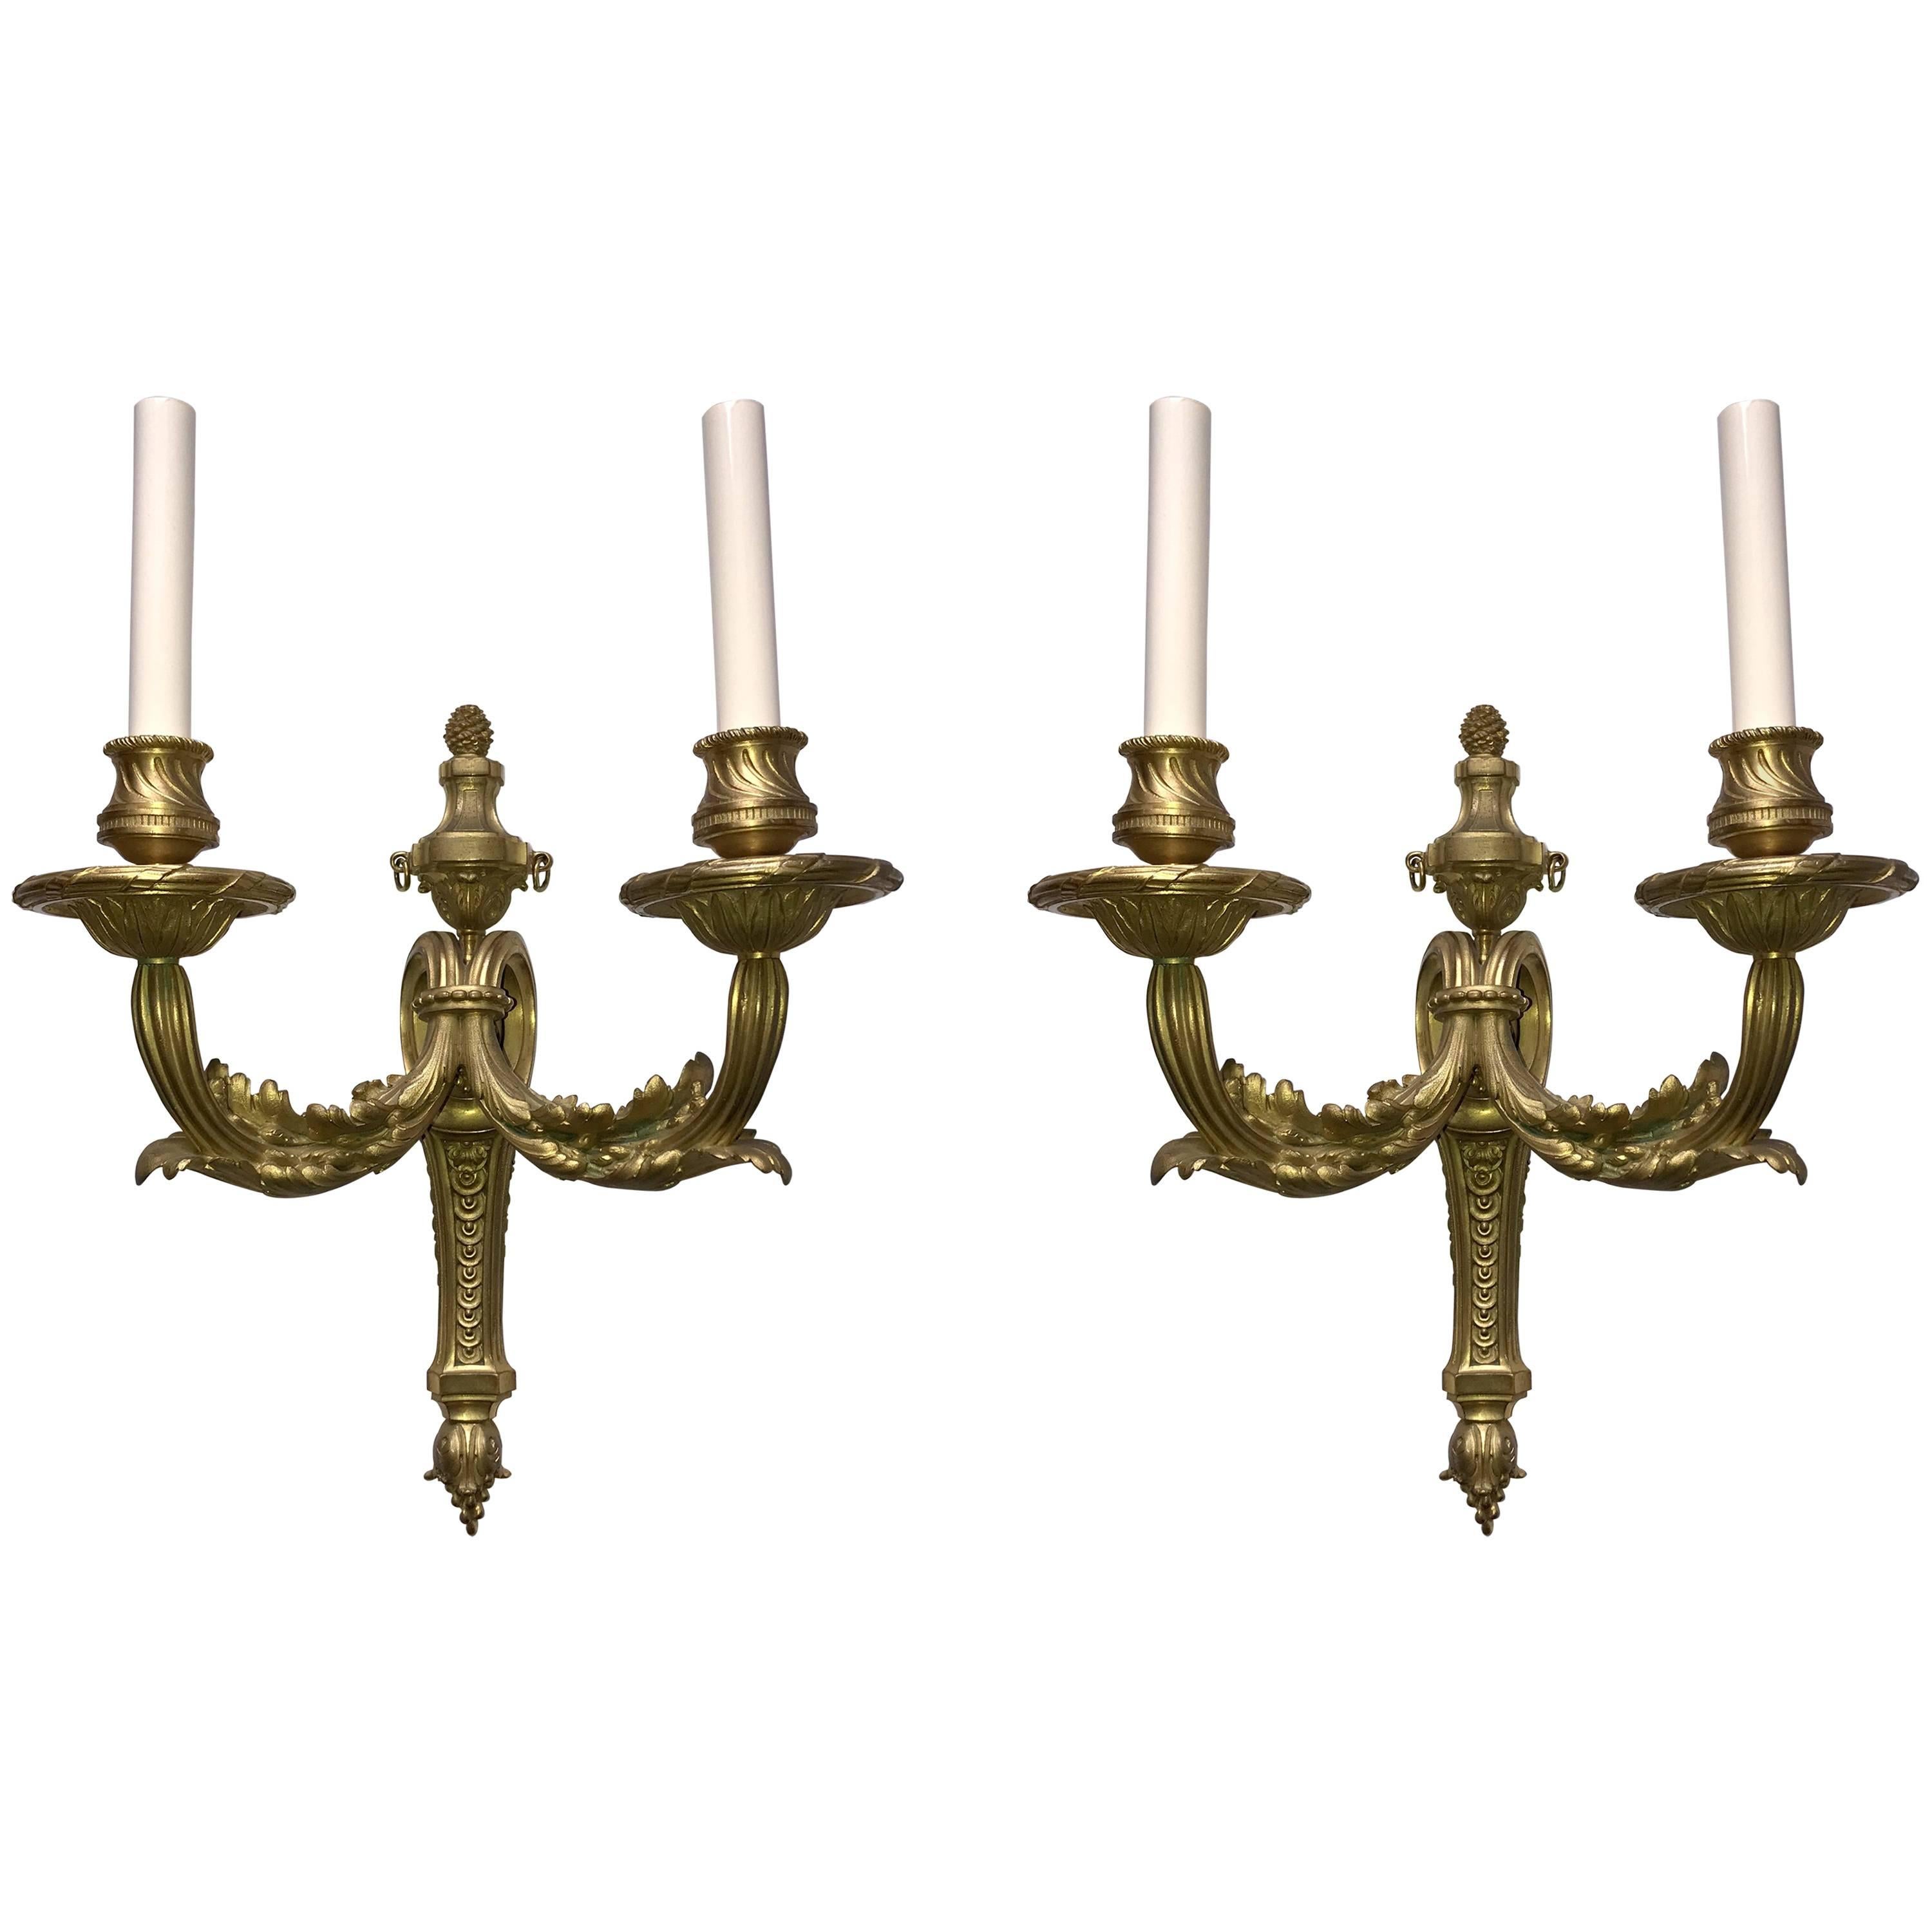 Wonderful Pair French Bronze Neoclassical Caldwell Regency Urn Filigree Sconces For Sale